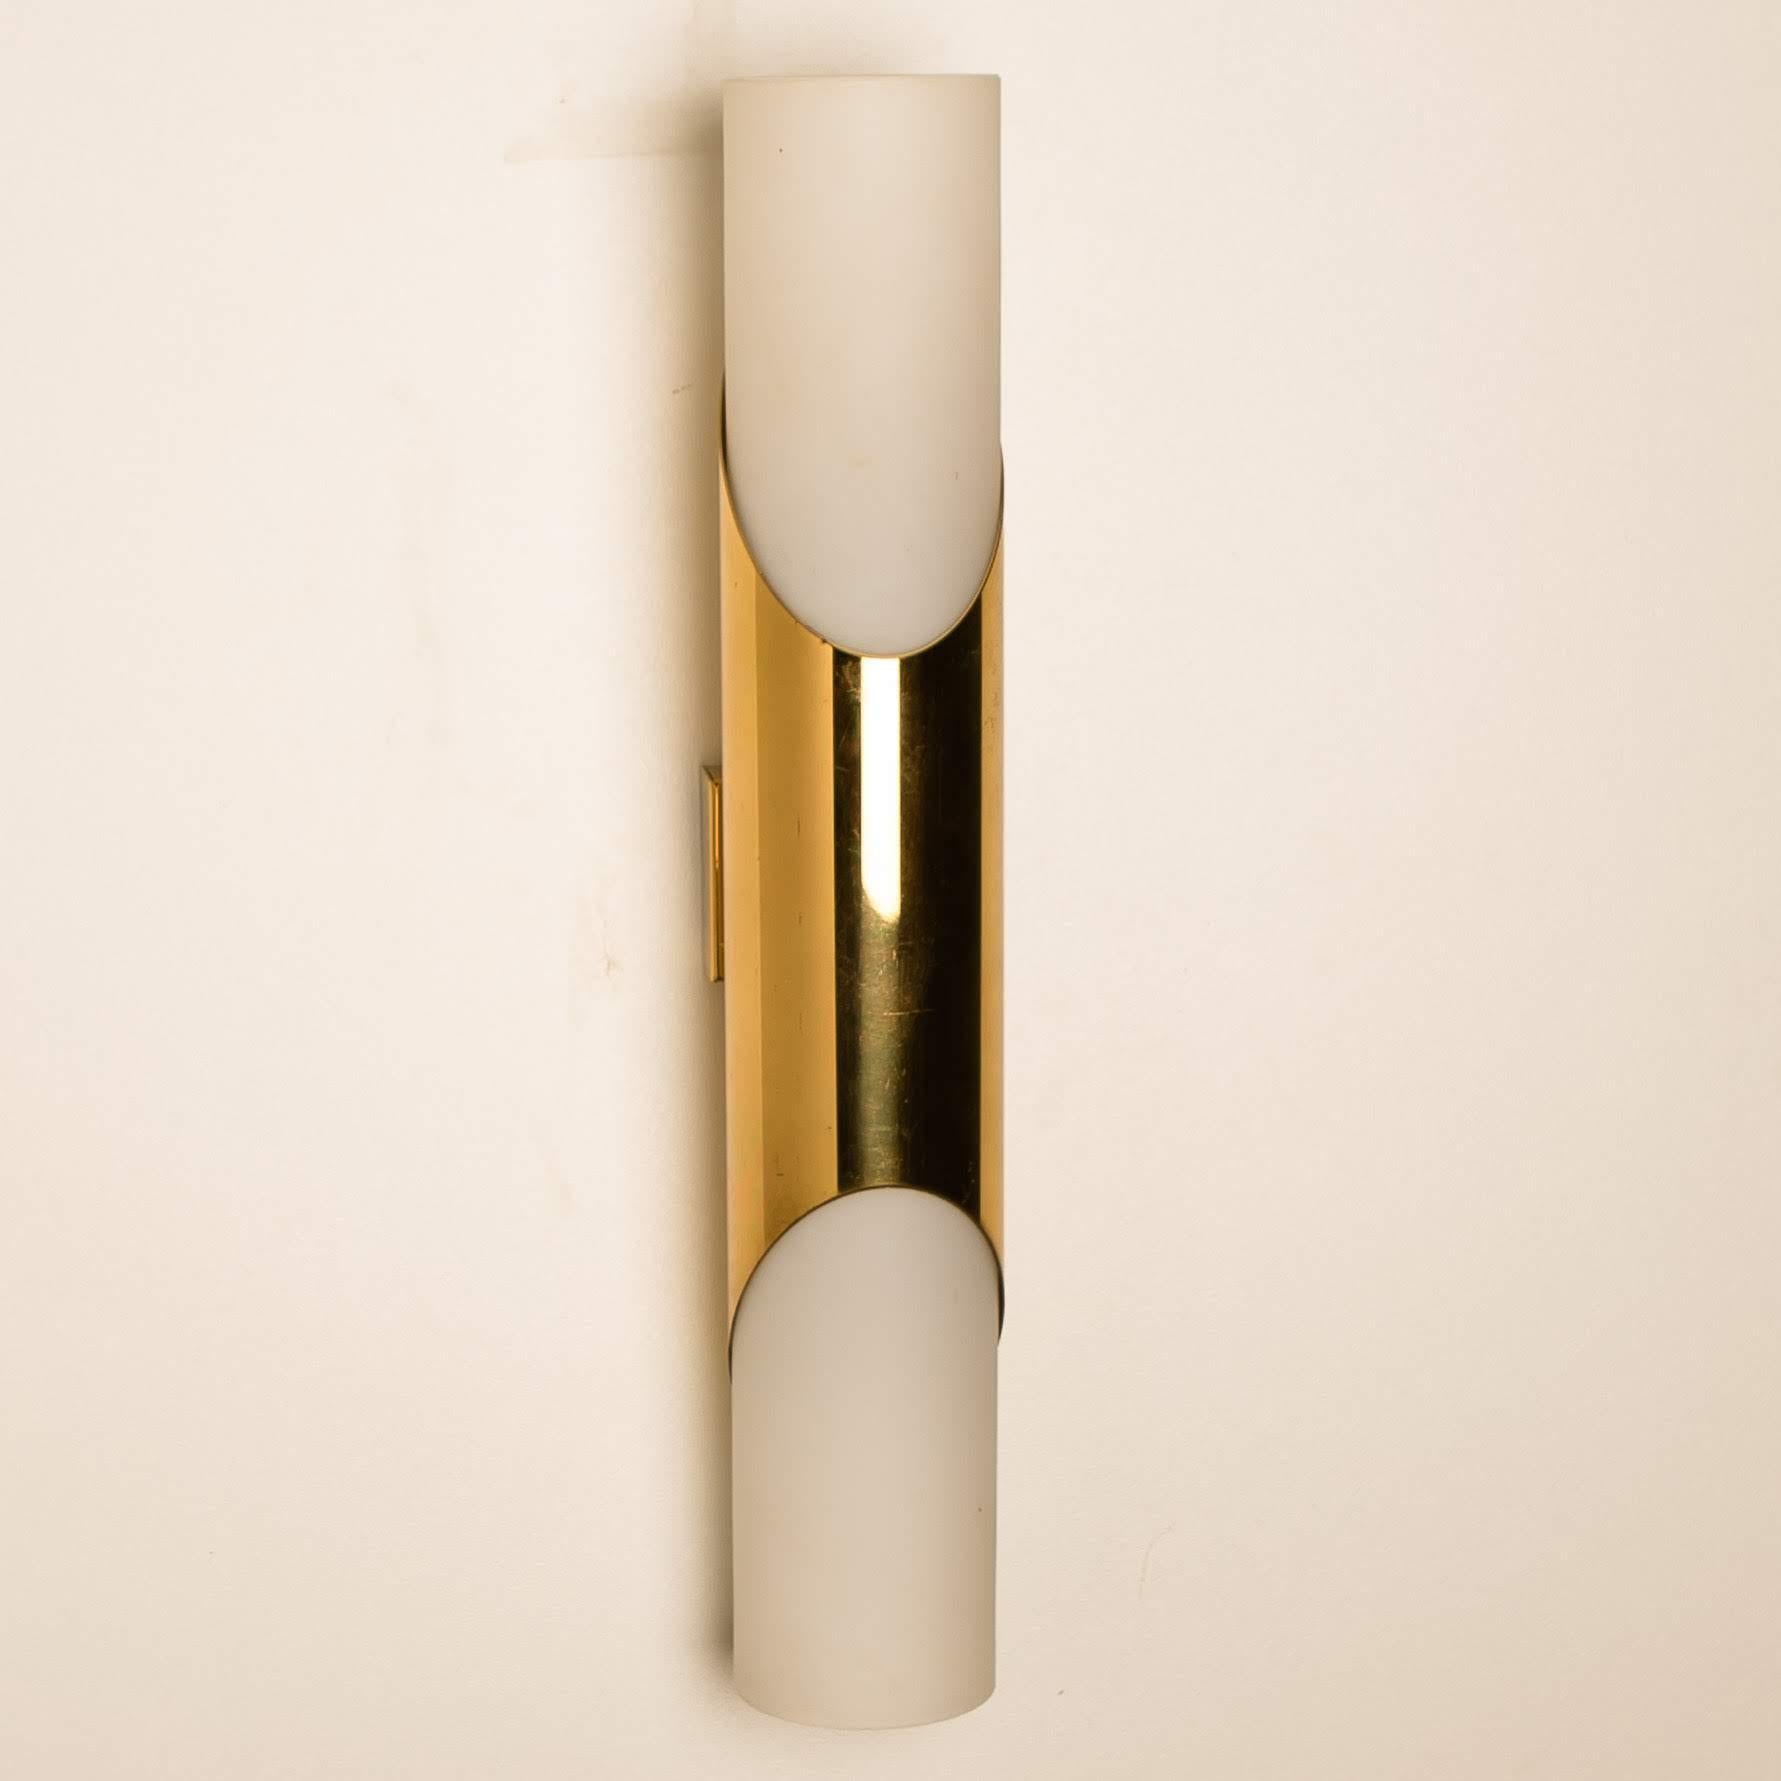 Brass Pair of Wall Sconces or Wall Lights in the Style of RAAK Amsterdam, 1970